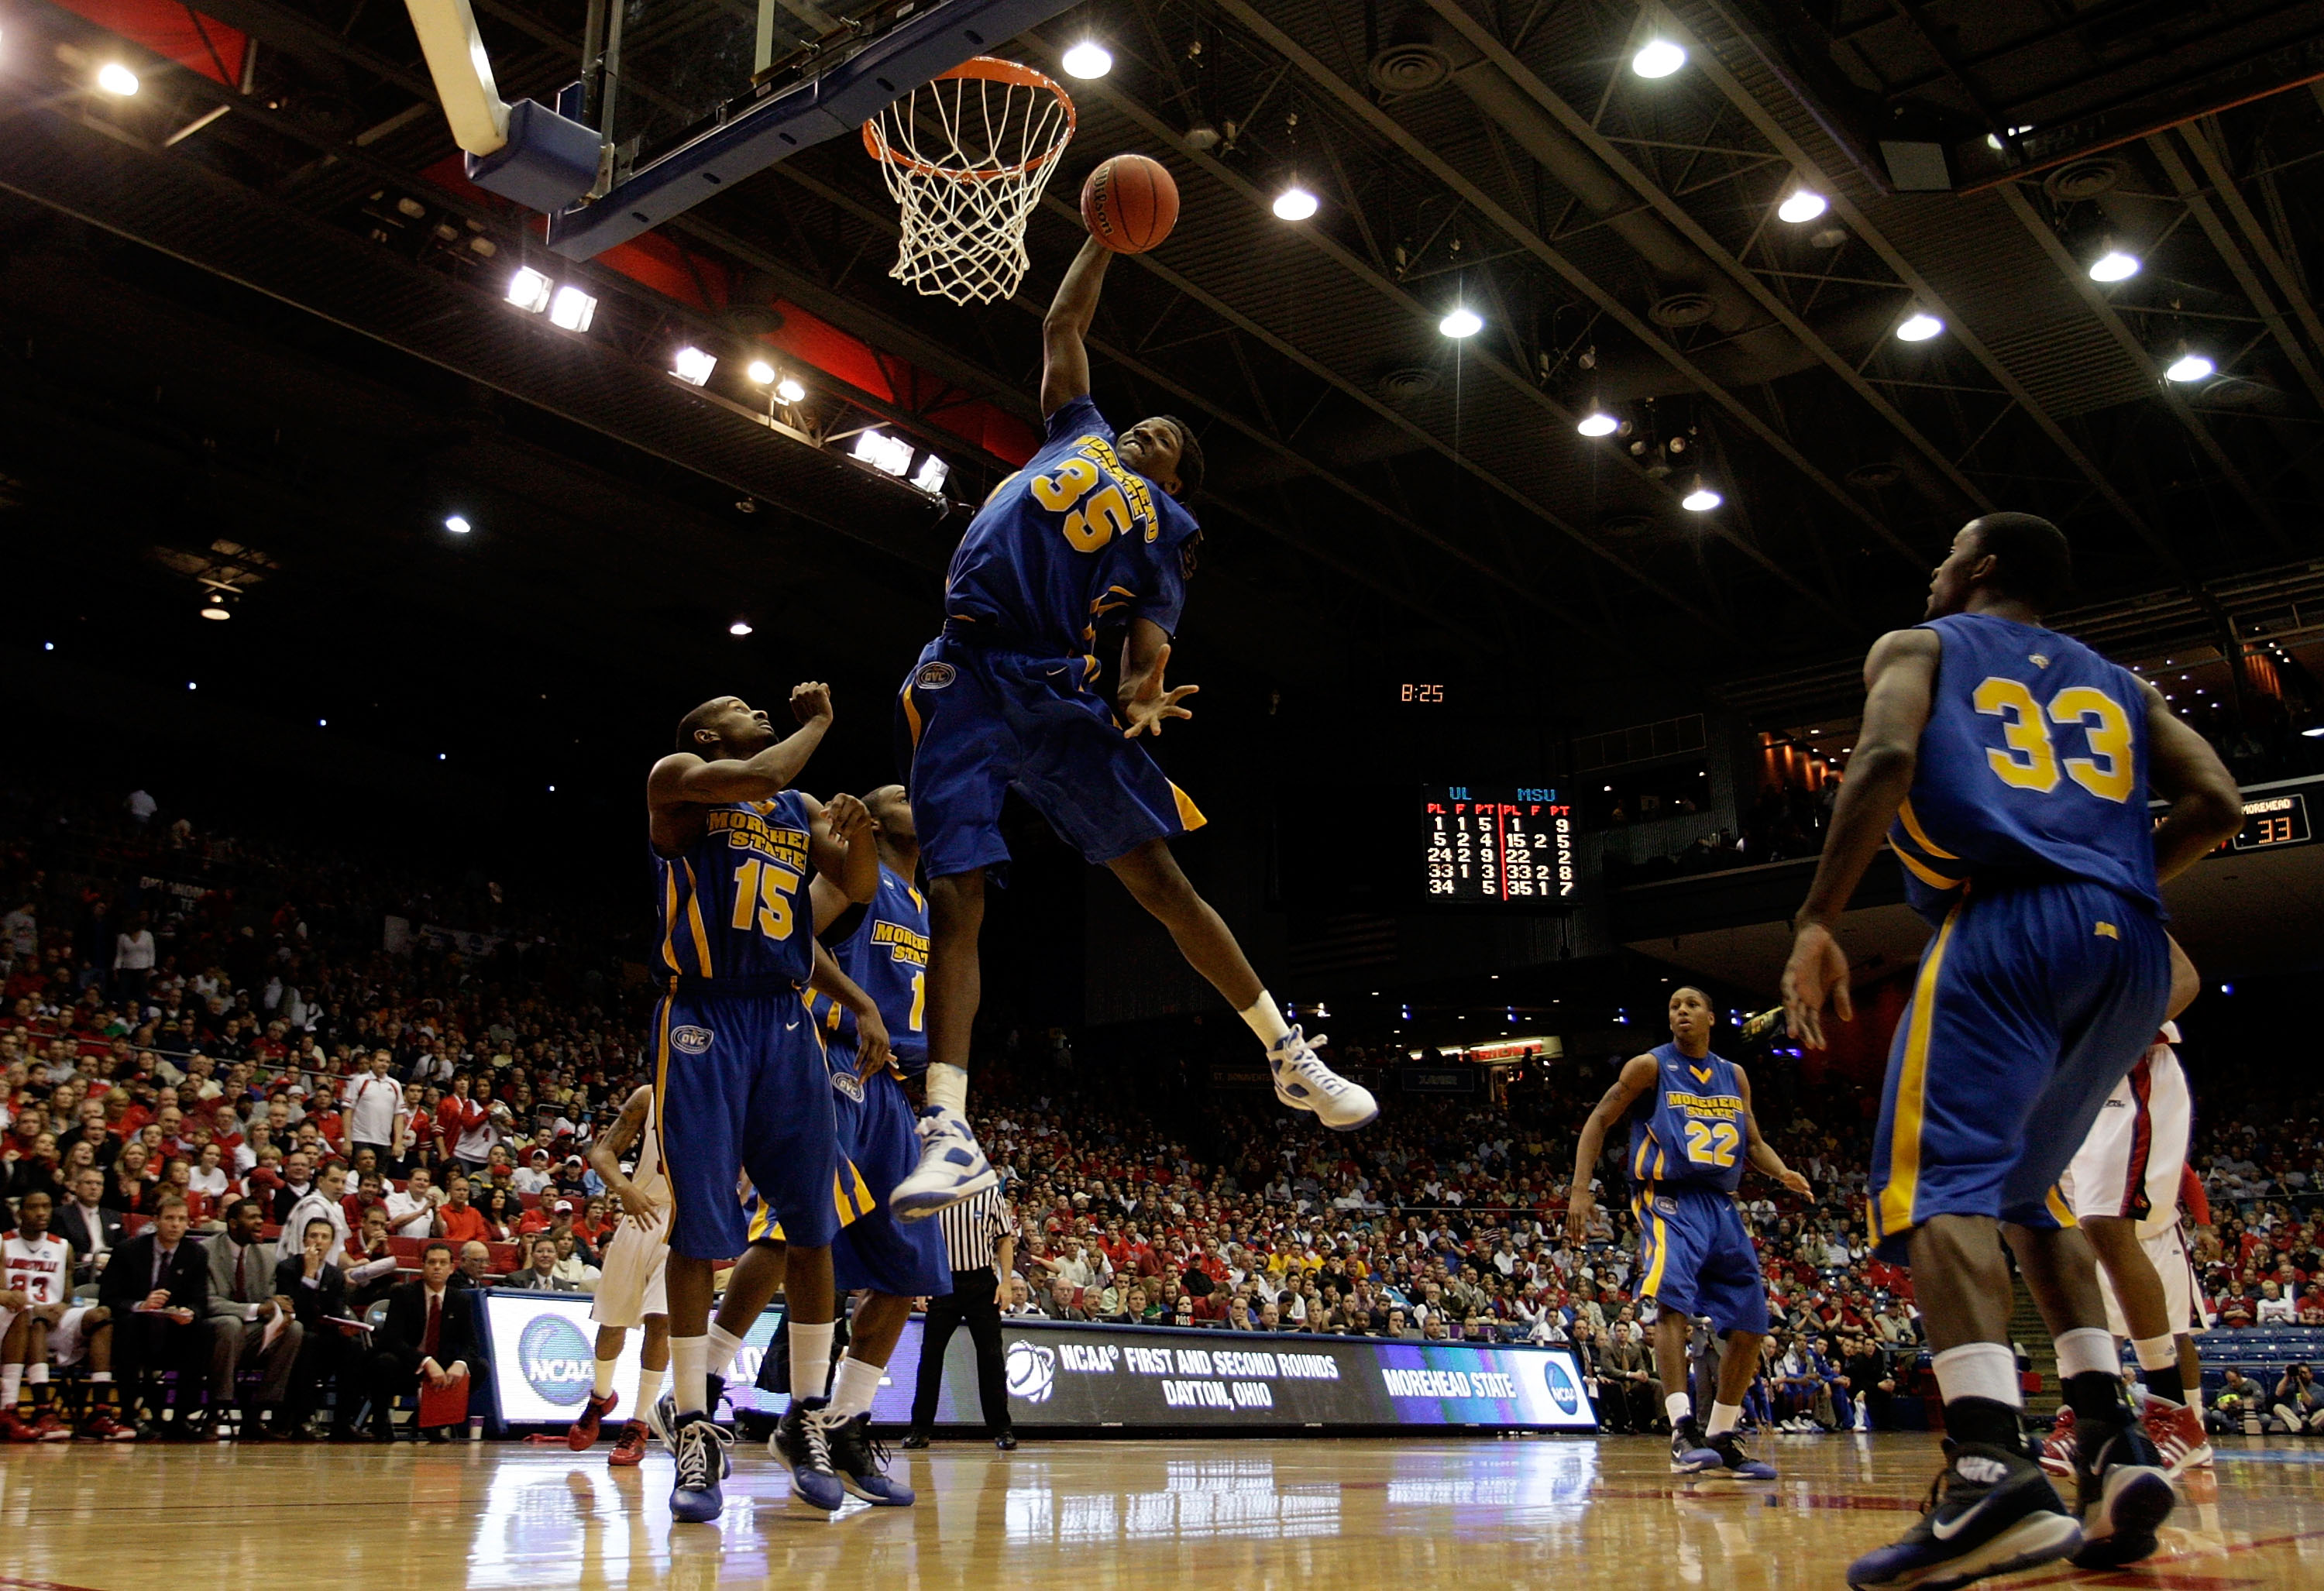 DAYTON, OH - MARCH 20: Kenneth Faried #35 of the Morehead State Eagles gets a rebound against the Louisville Cardinals during the first round of the NCAA Division I Men's Basketball Tournament at the University of Dayton Arena on March 20, 2009 in Dayton,